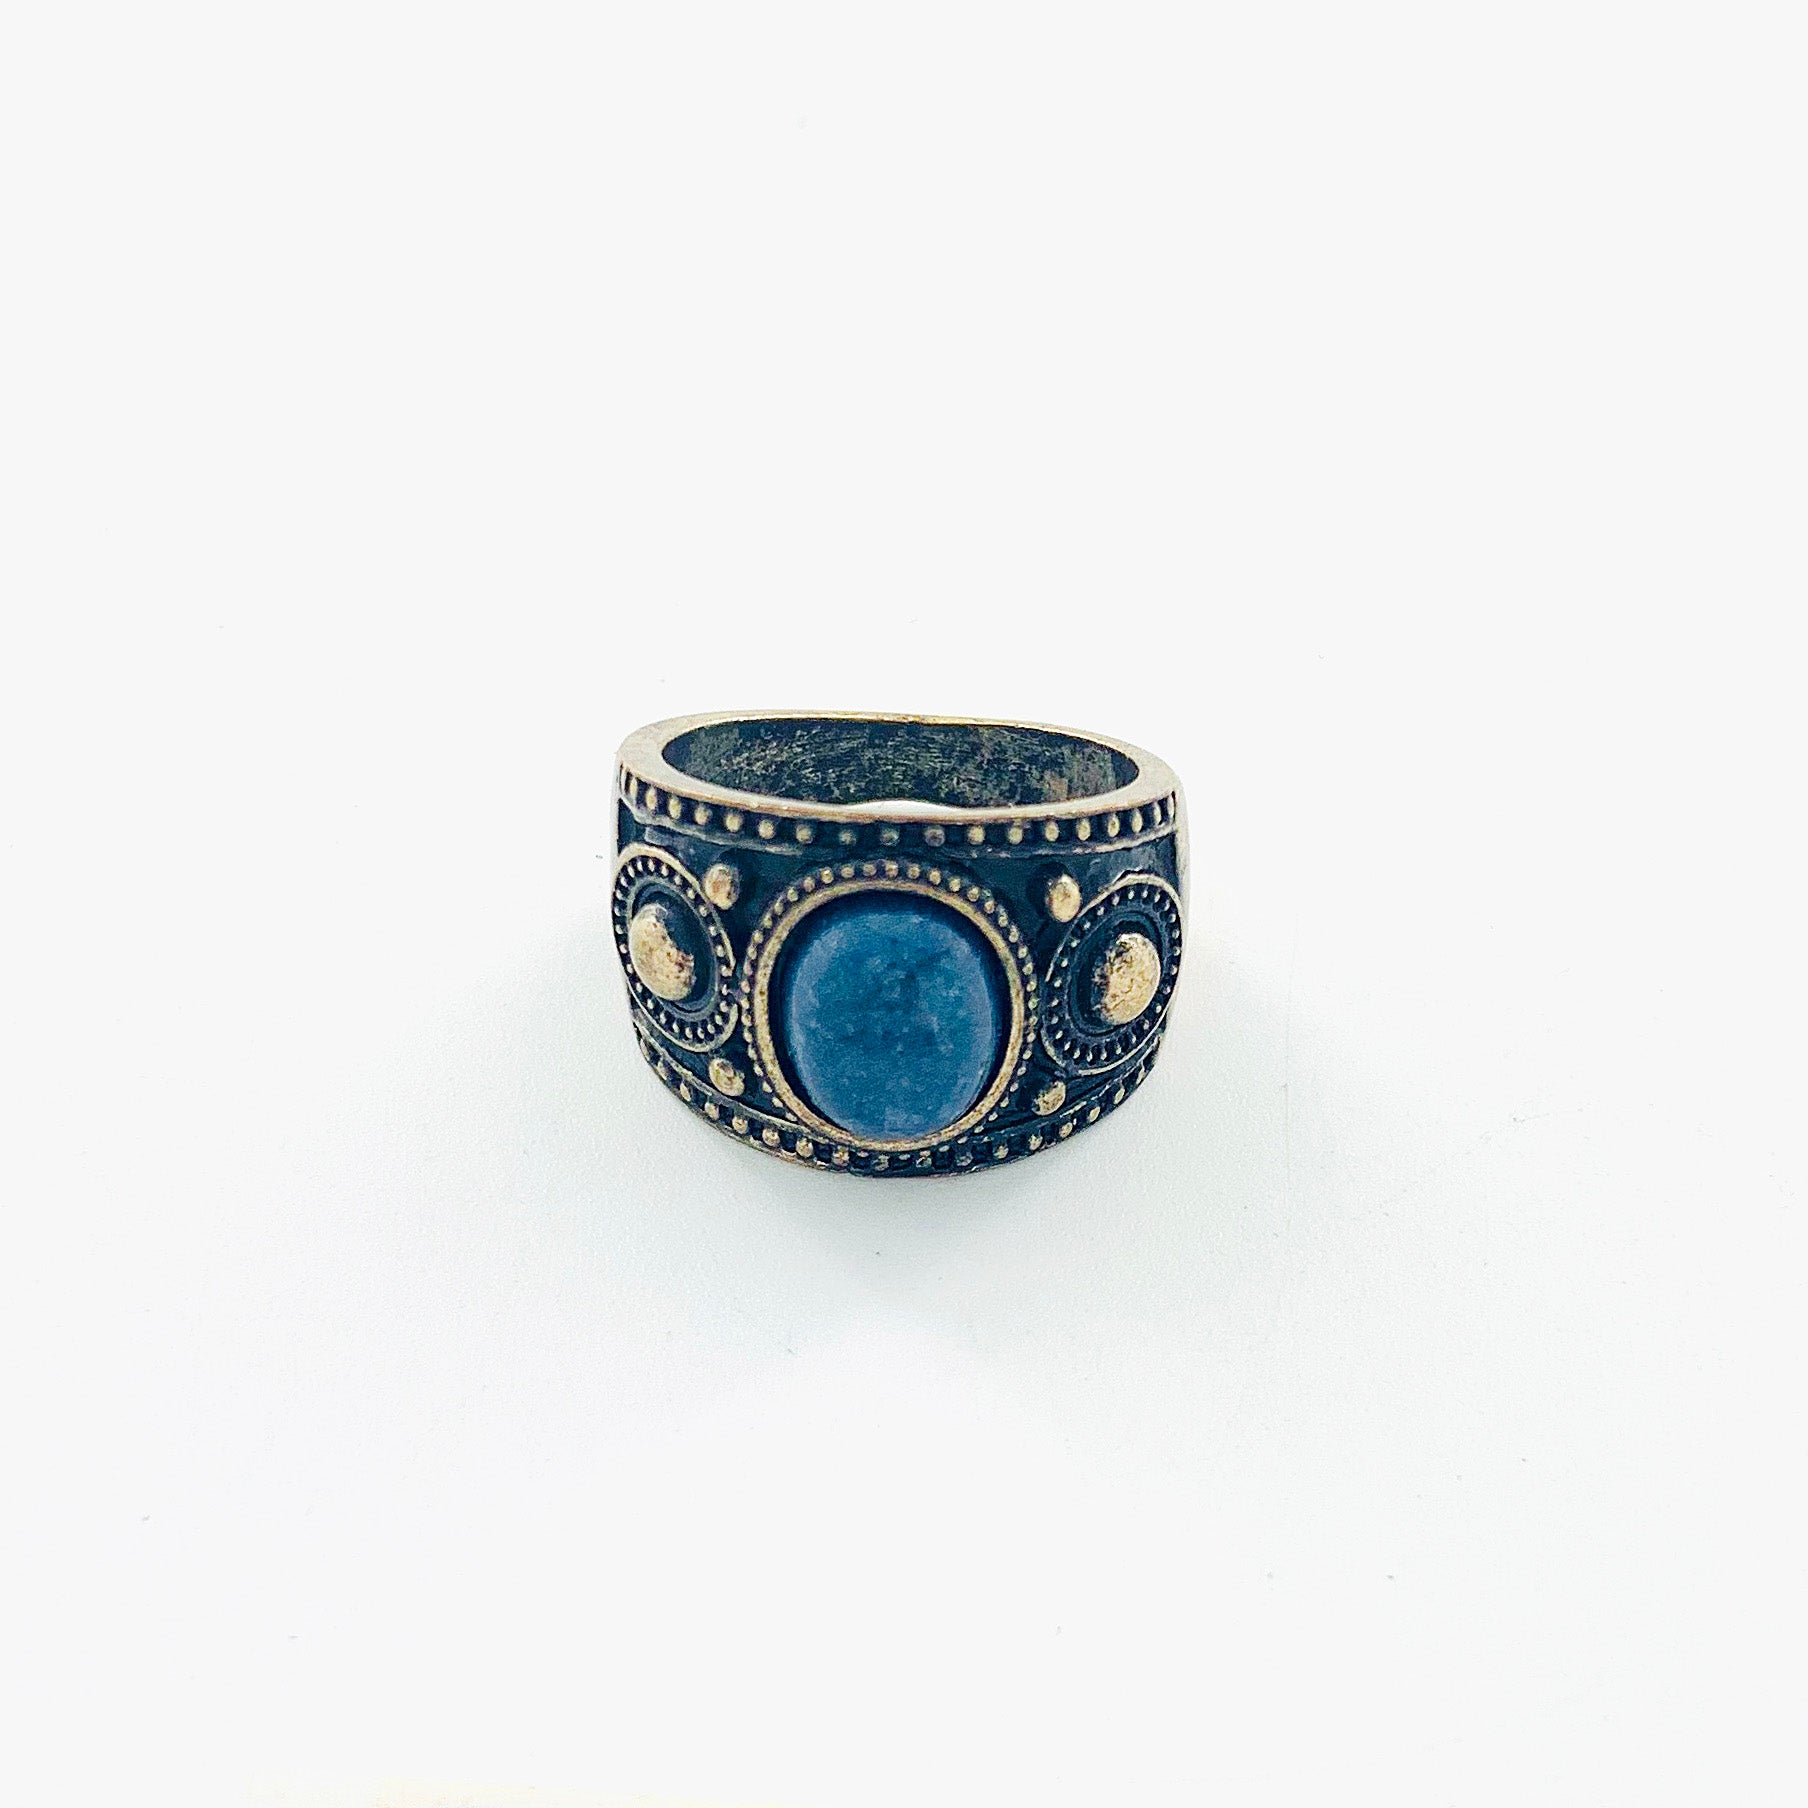 Vintage-styled ring with blue stone